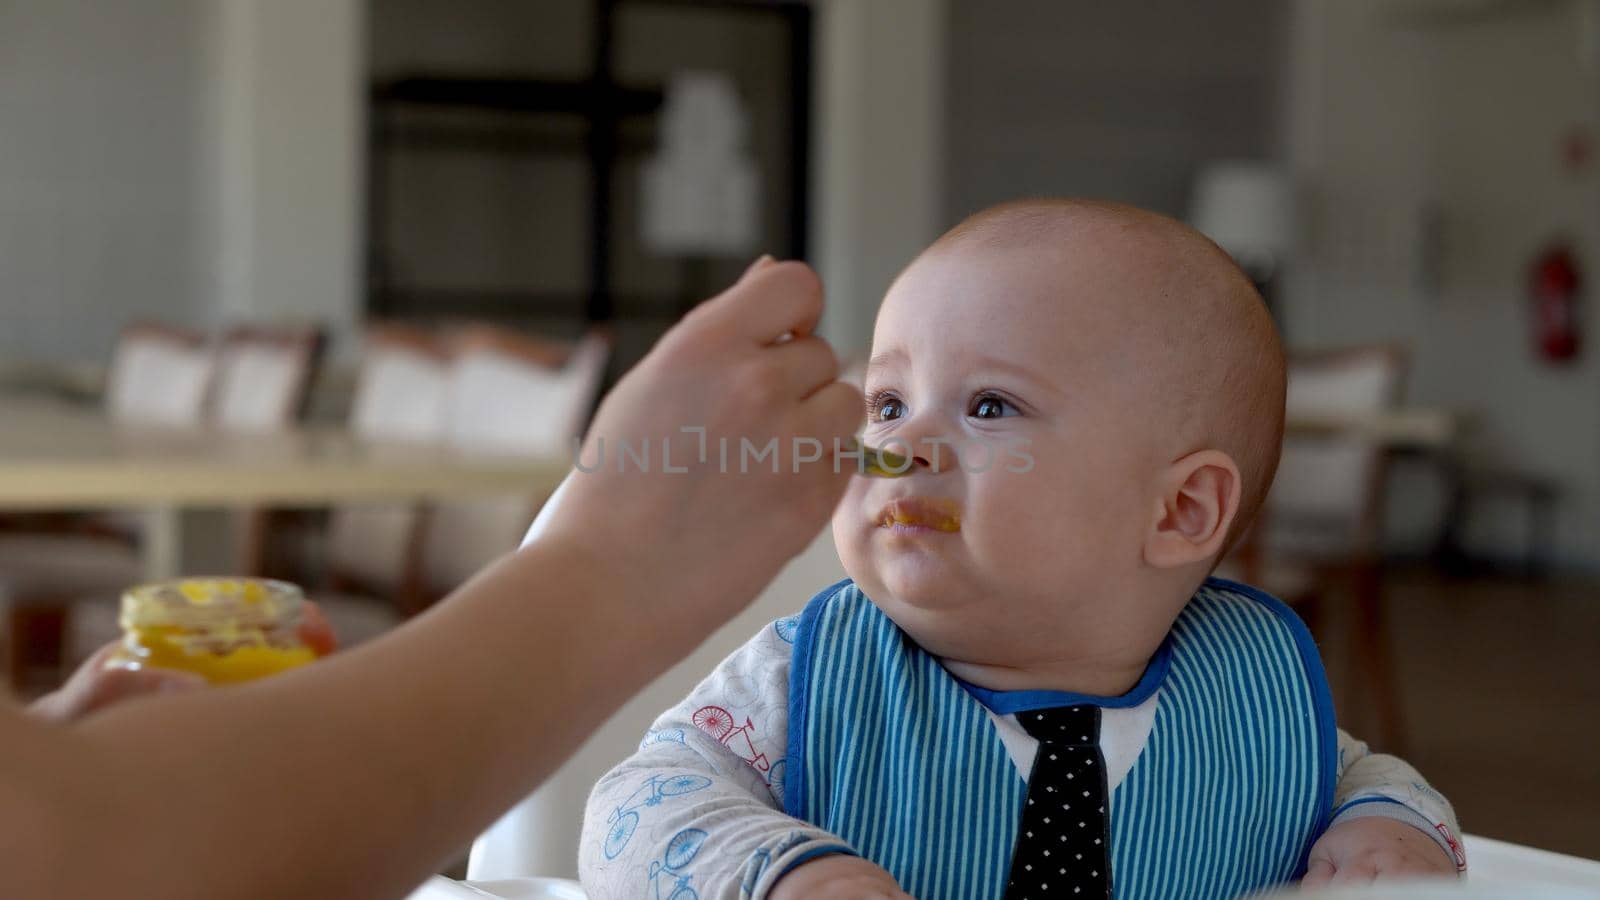 mom Mother feed young baby in white feeding up high chair, first supplement vegetable puree Happy smiling kid eat for the frst time, child with dirty face, little infant boy eating porridge nutrition by mytrykau